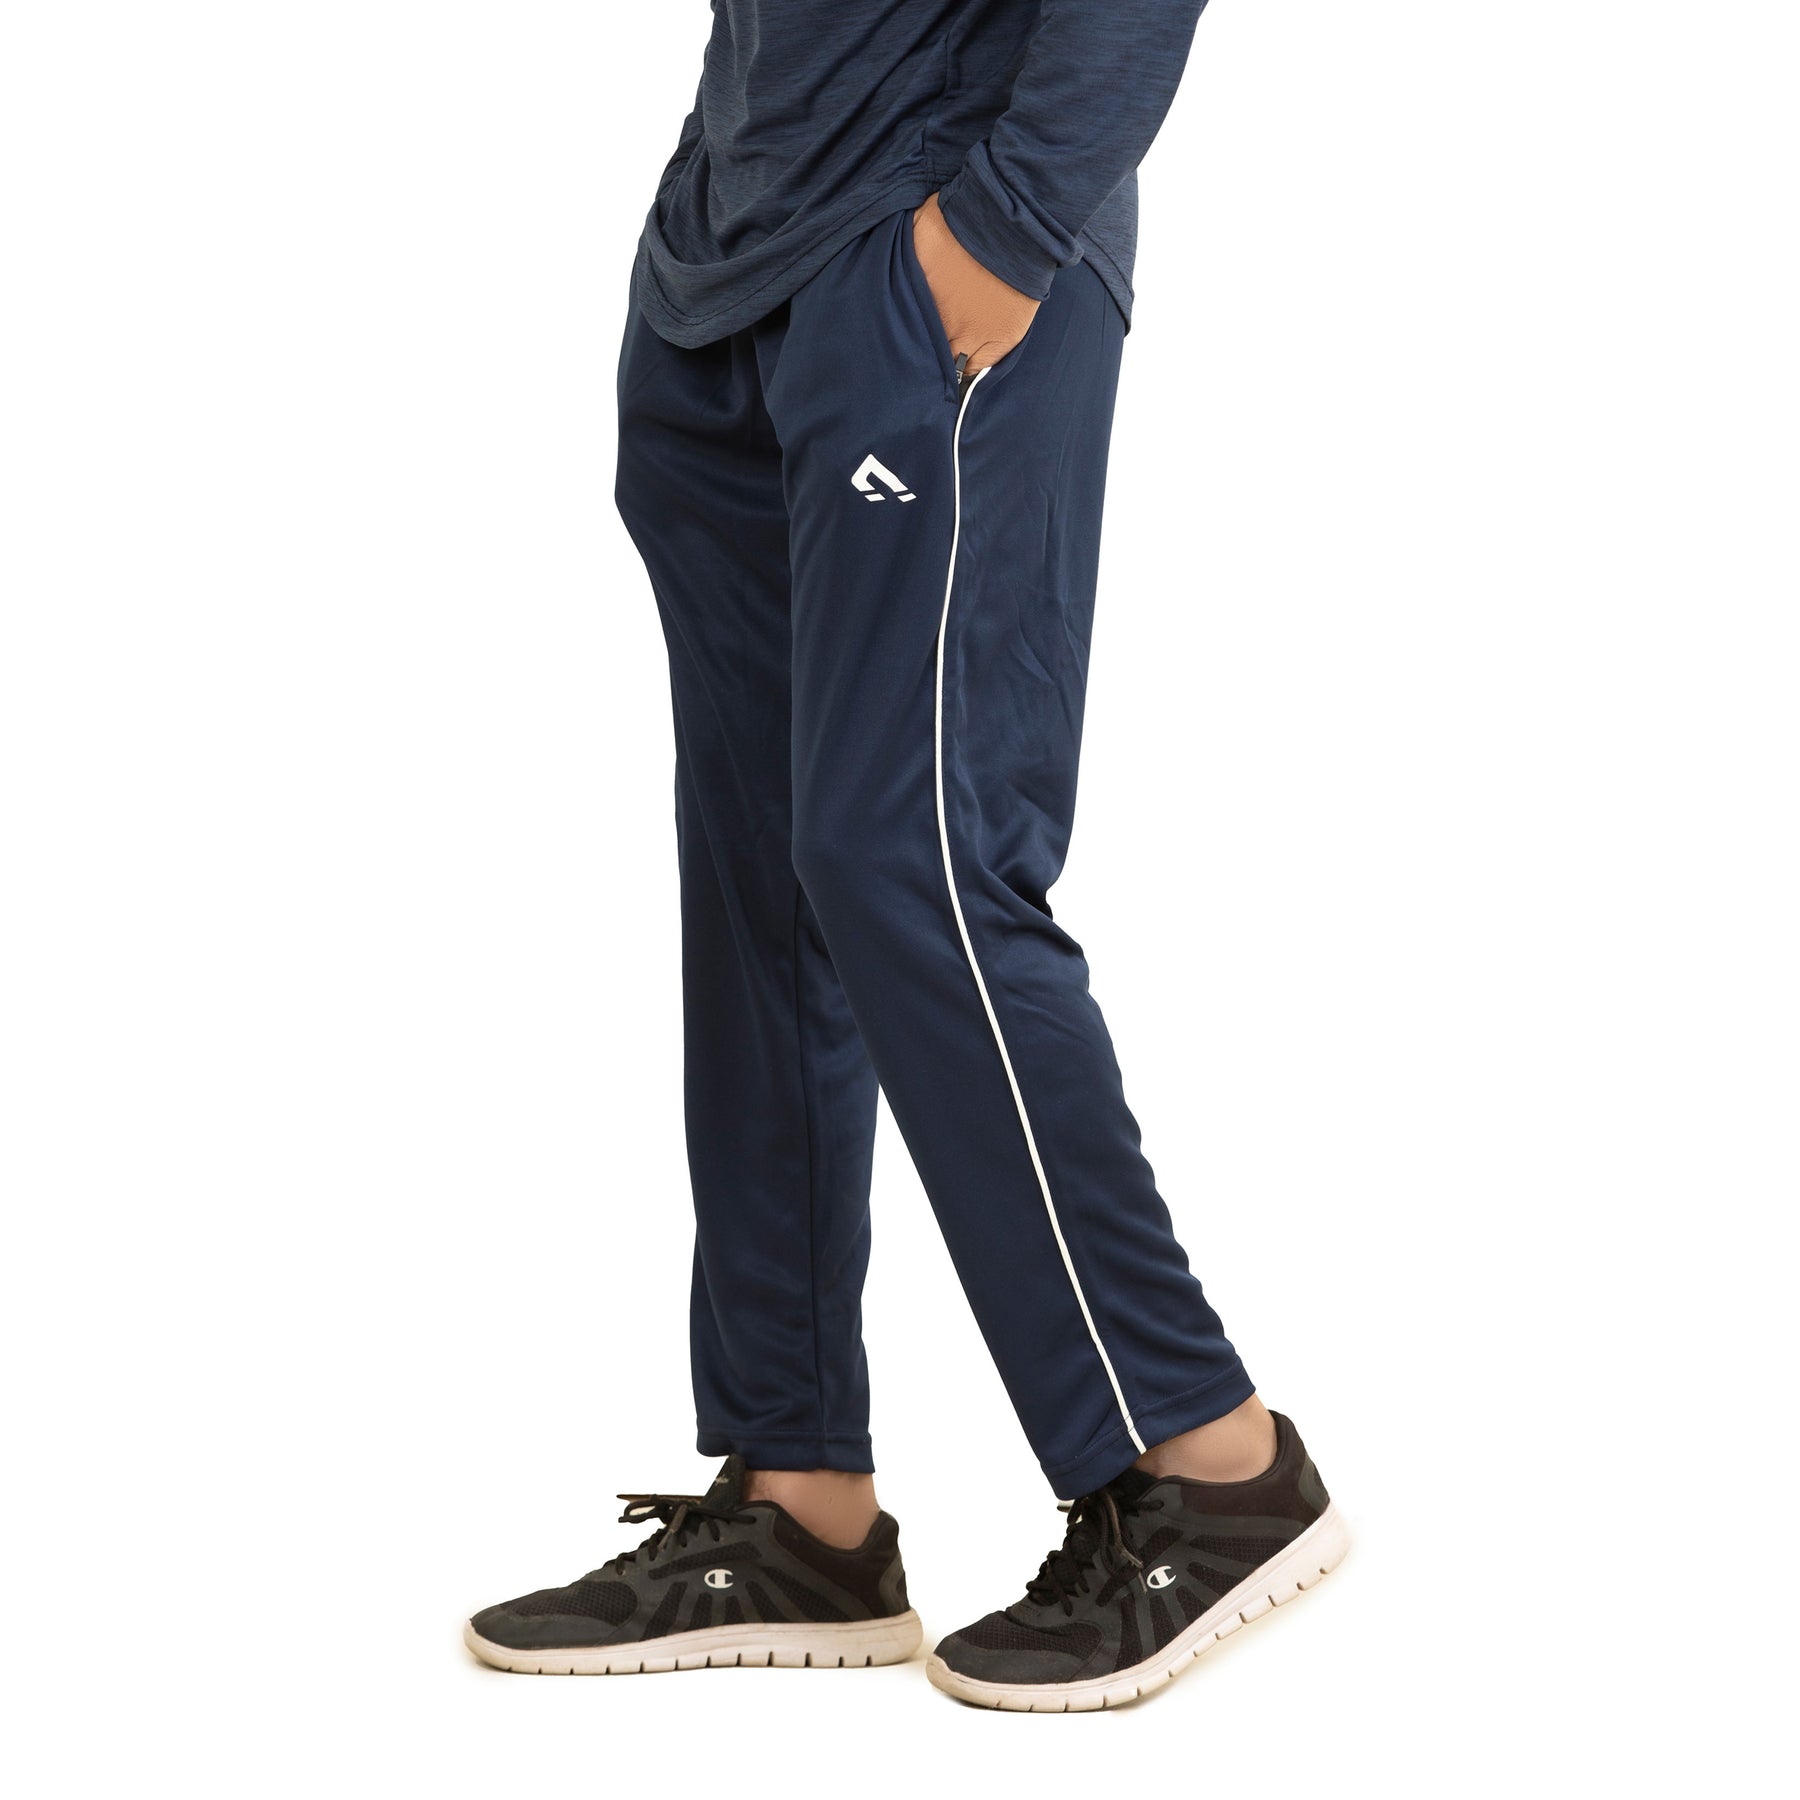 Men Sports Trousers in Pakistan - Buy Gym Trousers at Best Price – Alay